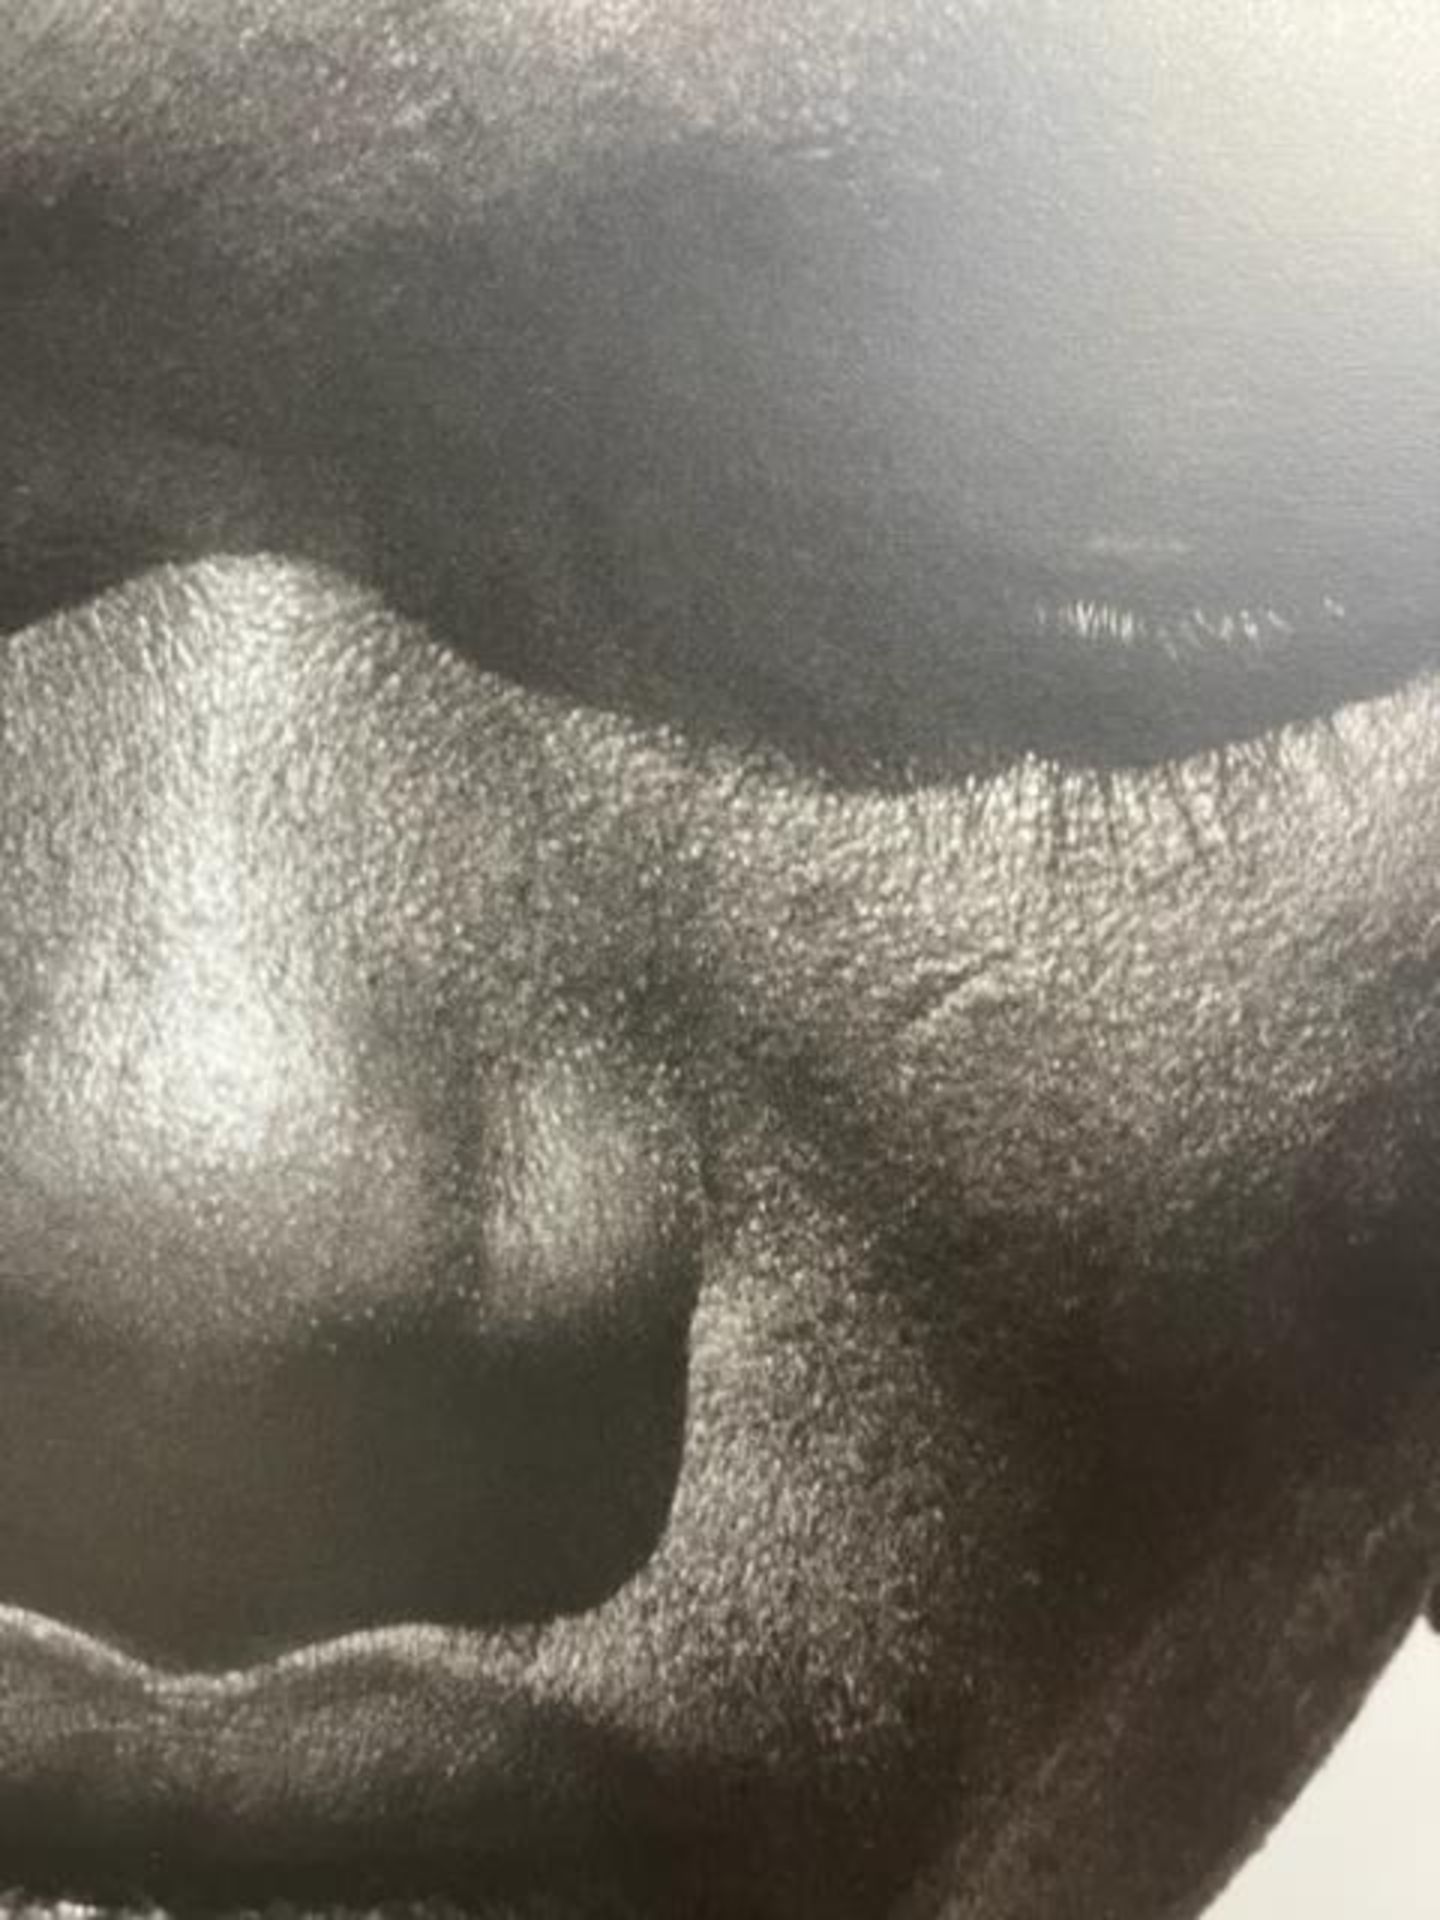 Herb Ritts "Untitled" Print. - Image 3 of 6